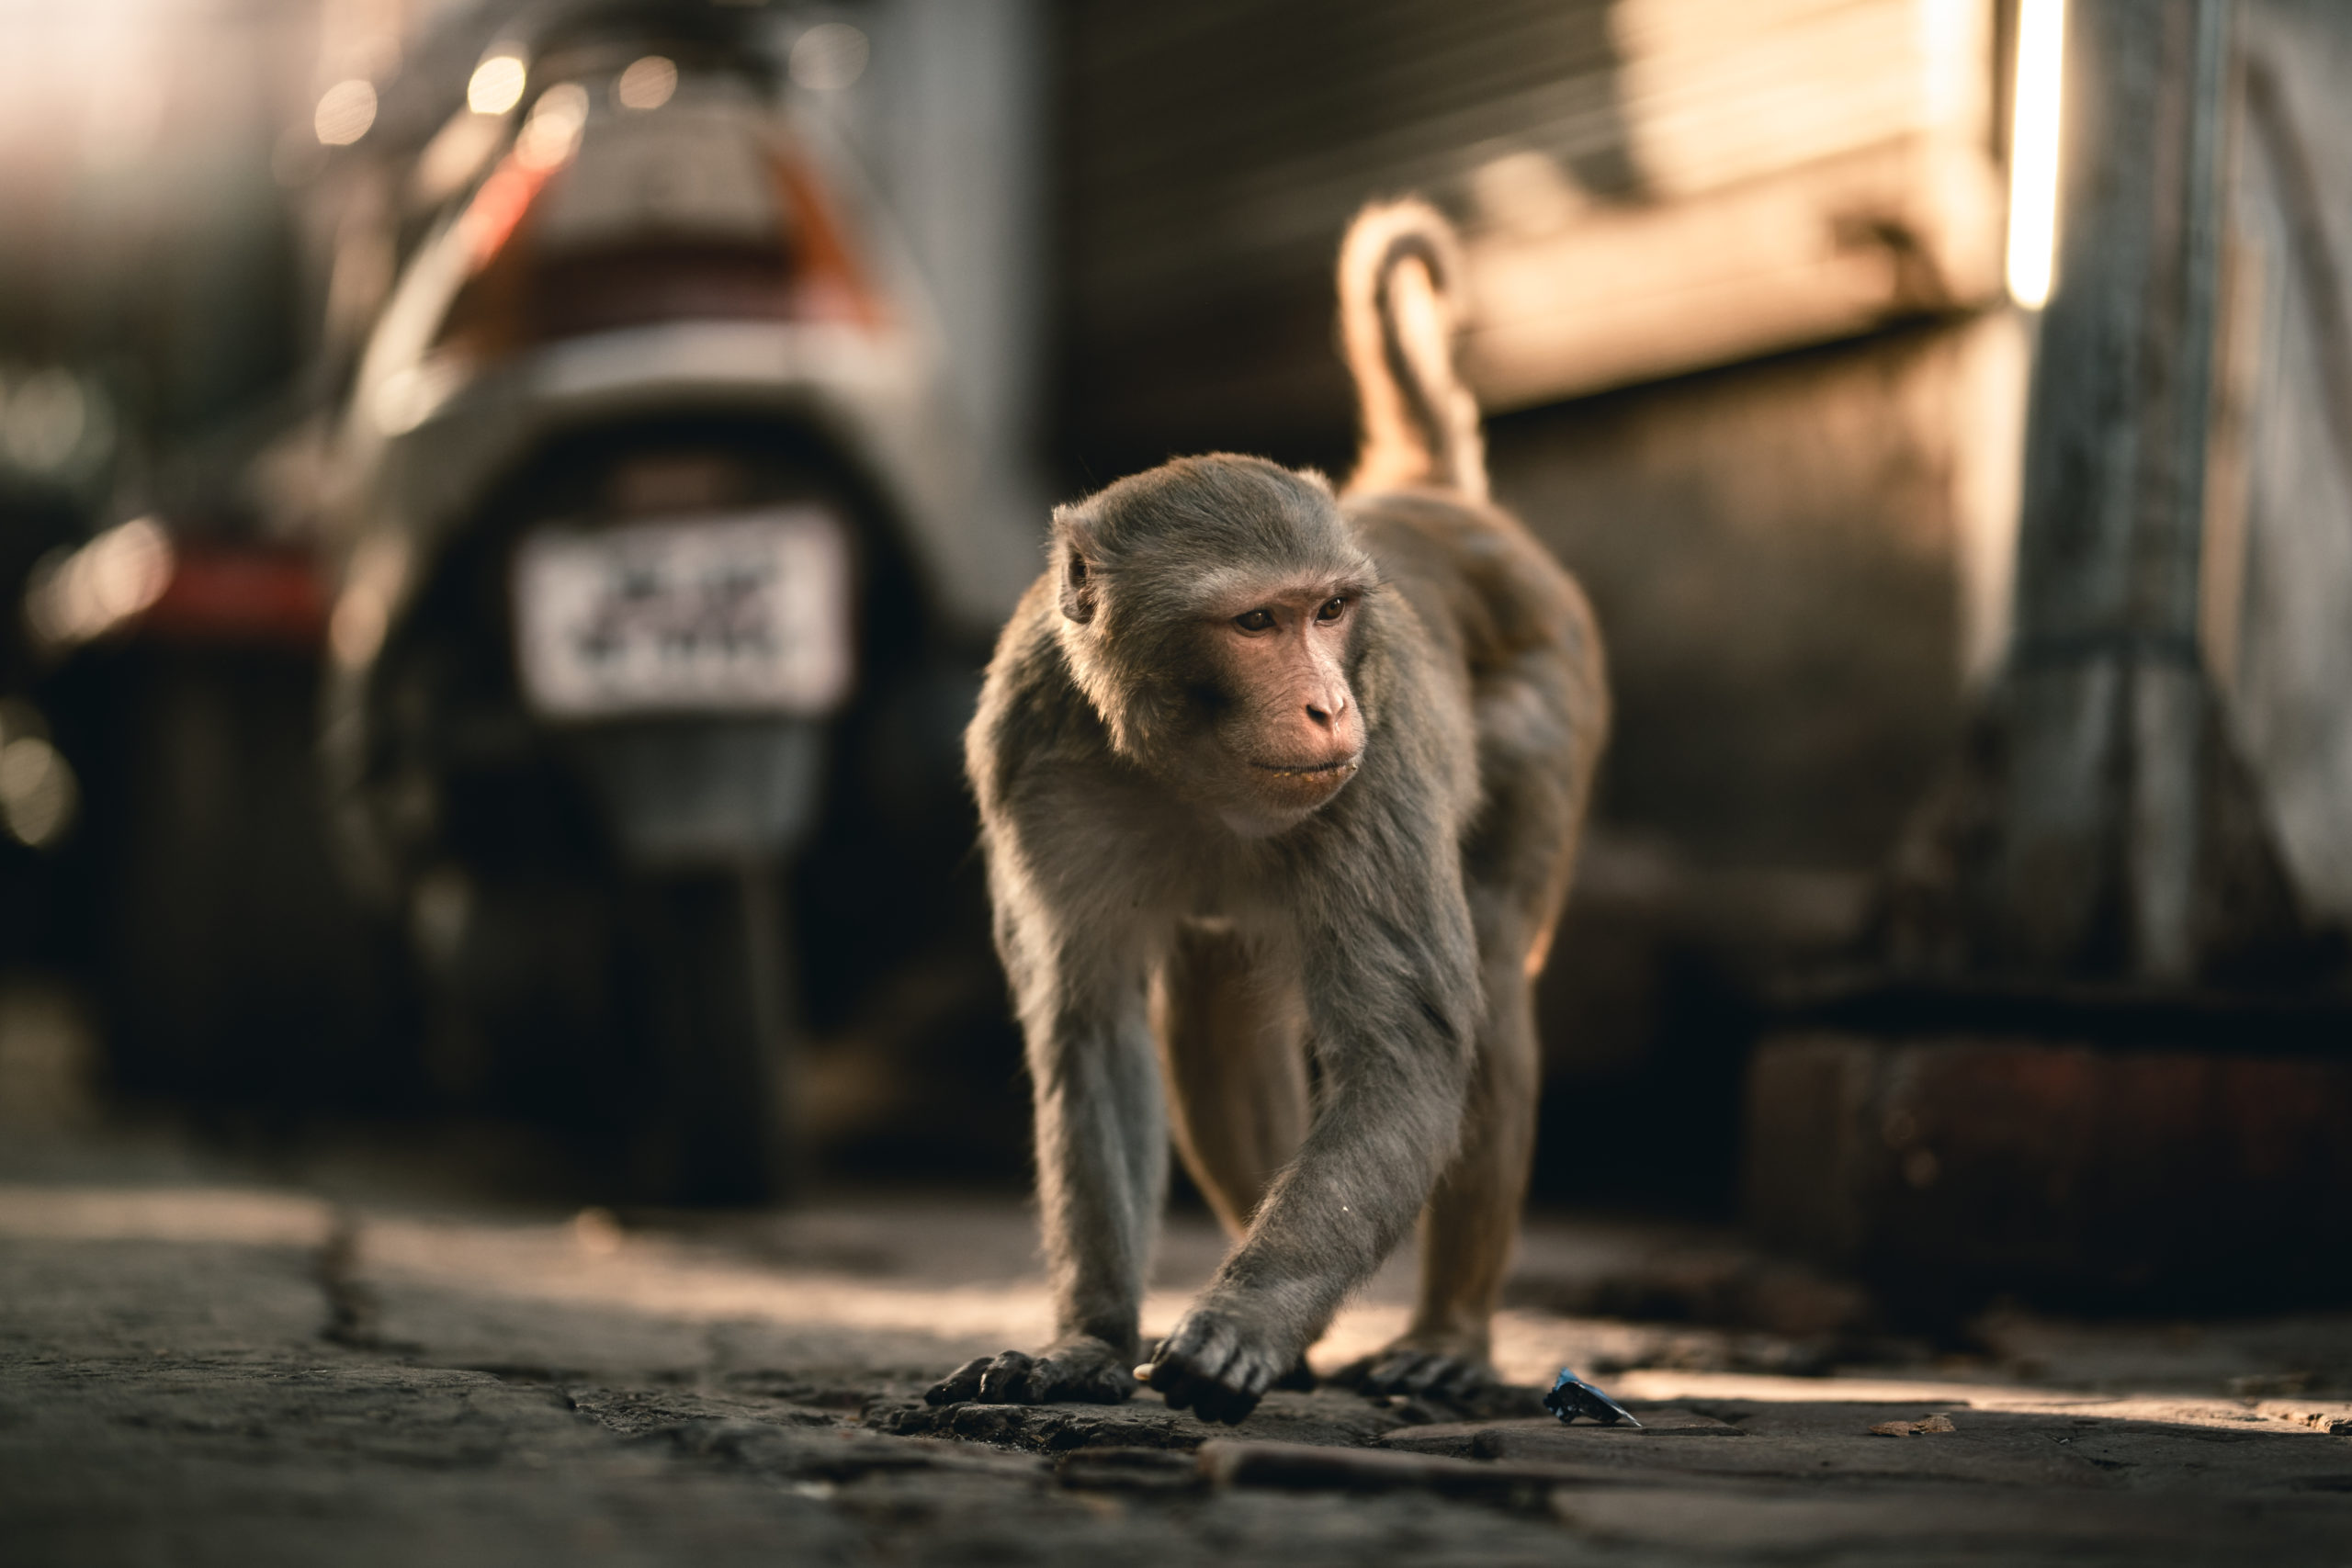 Chris Klupenger as a Street photography of a monkey on the streets of Mathura, India